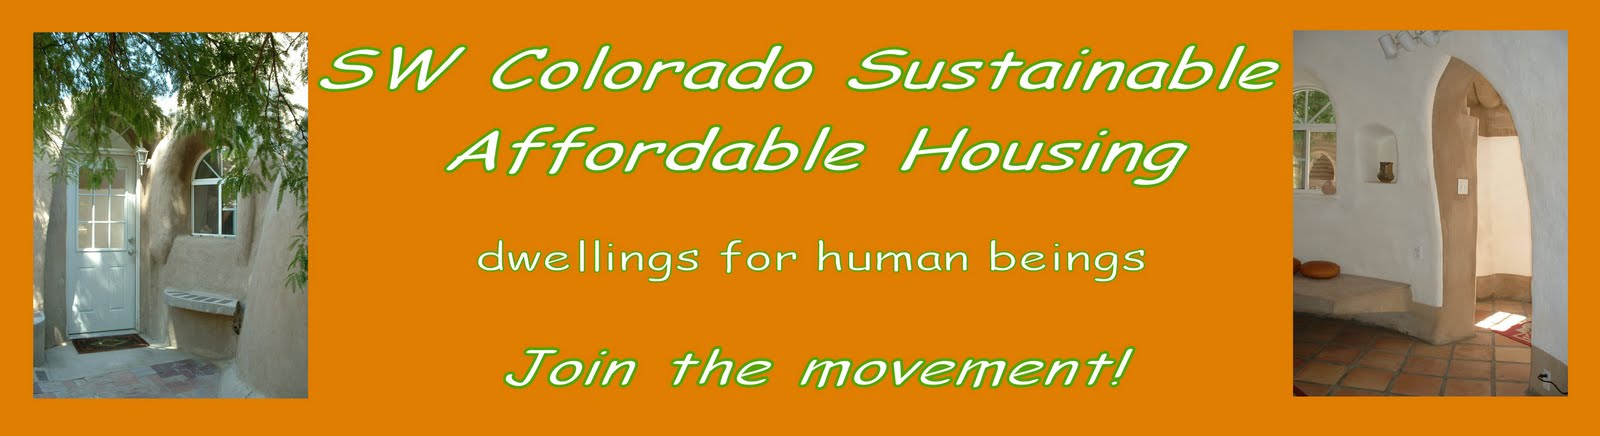 SW Colorado Sustainable Affordable Housing